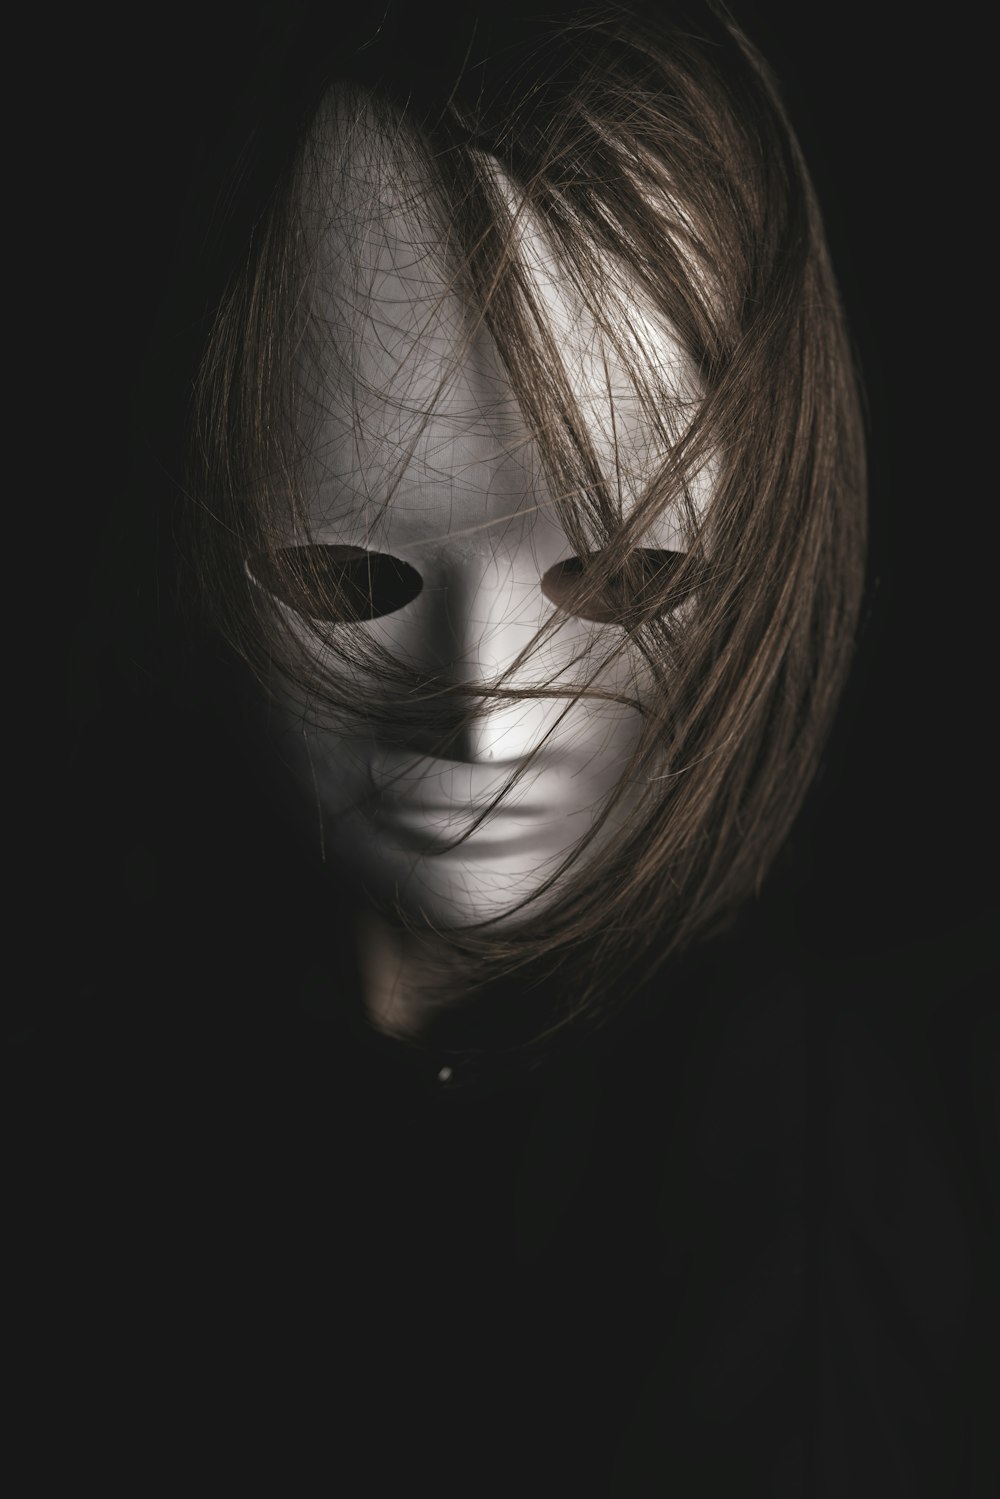 51,300+ Scary Mask Stock Photos, Pictures & Royalty-Free Images - iStock